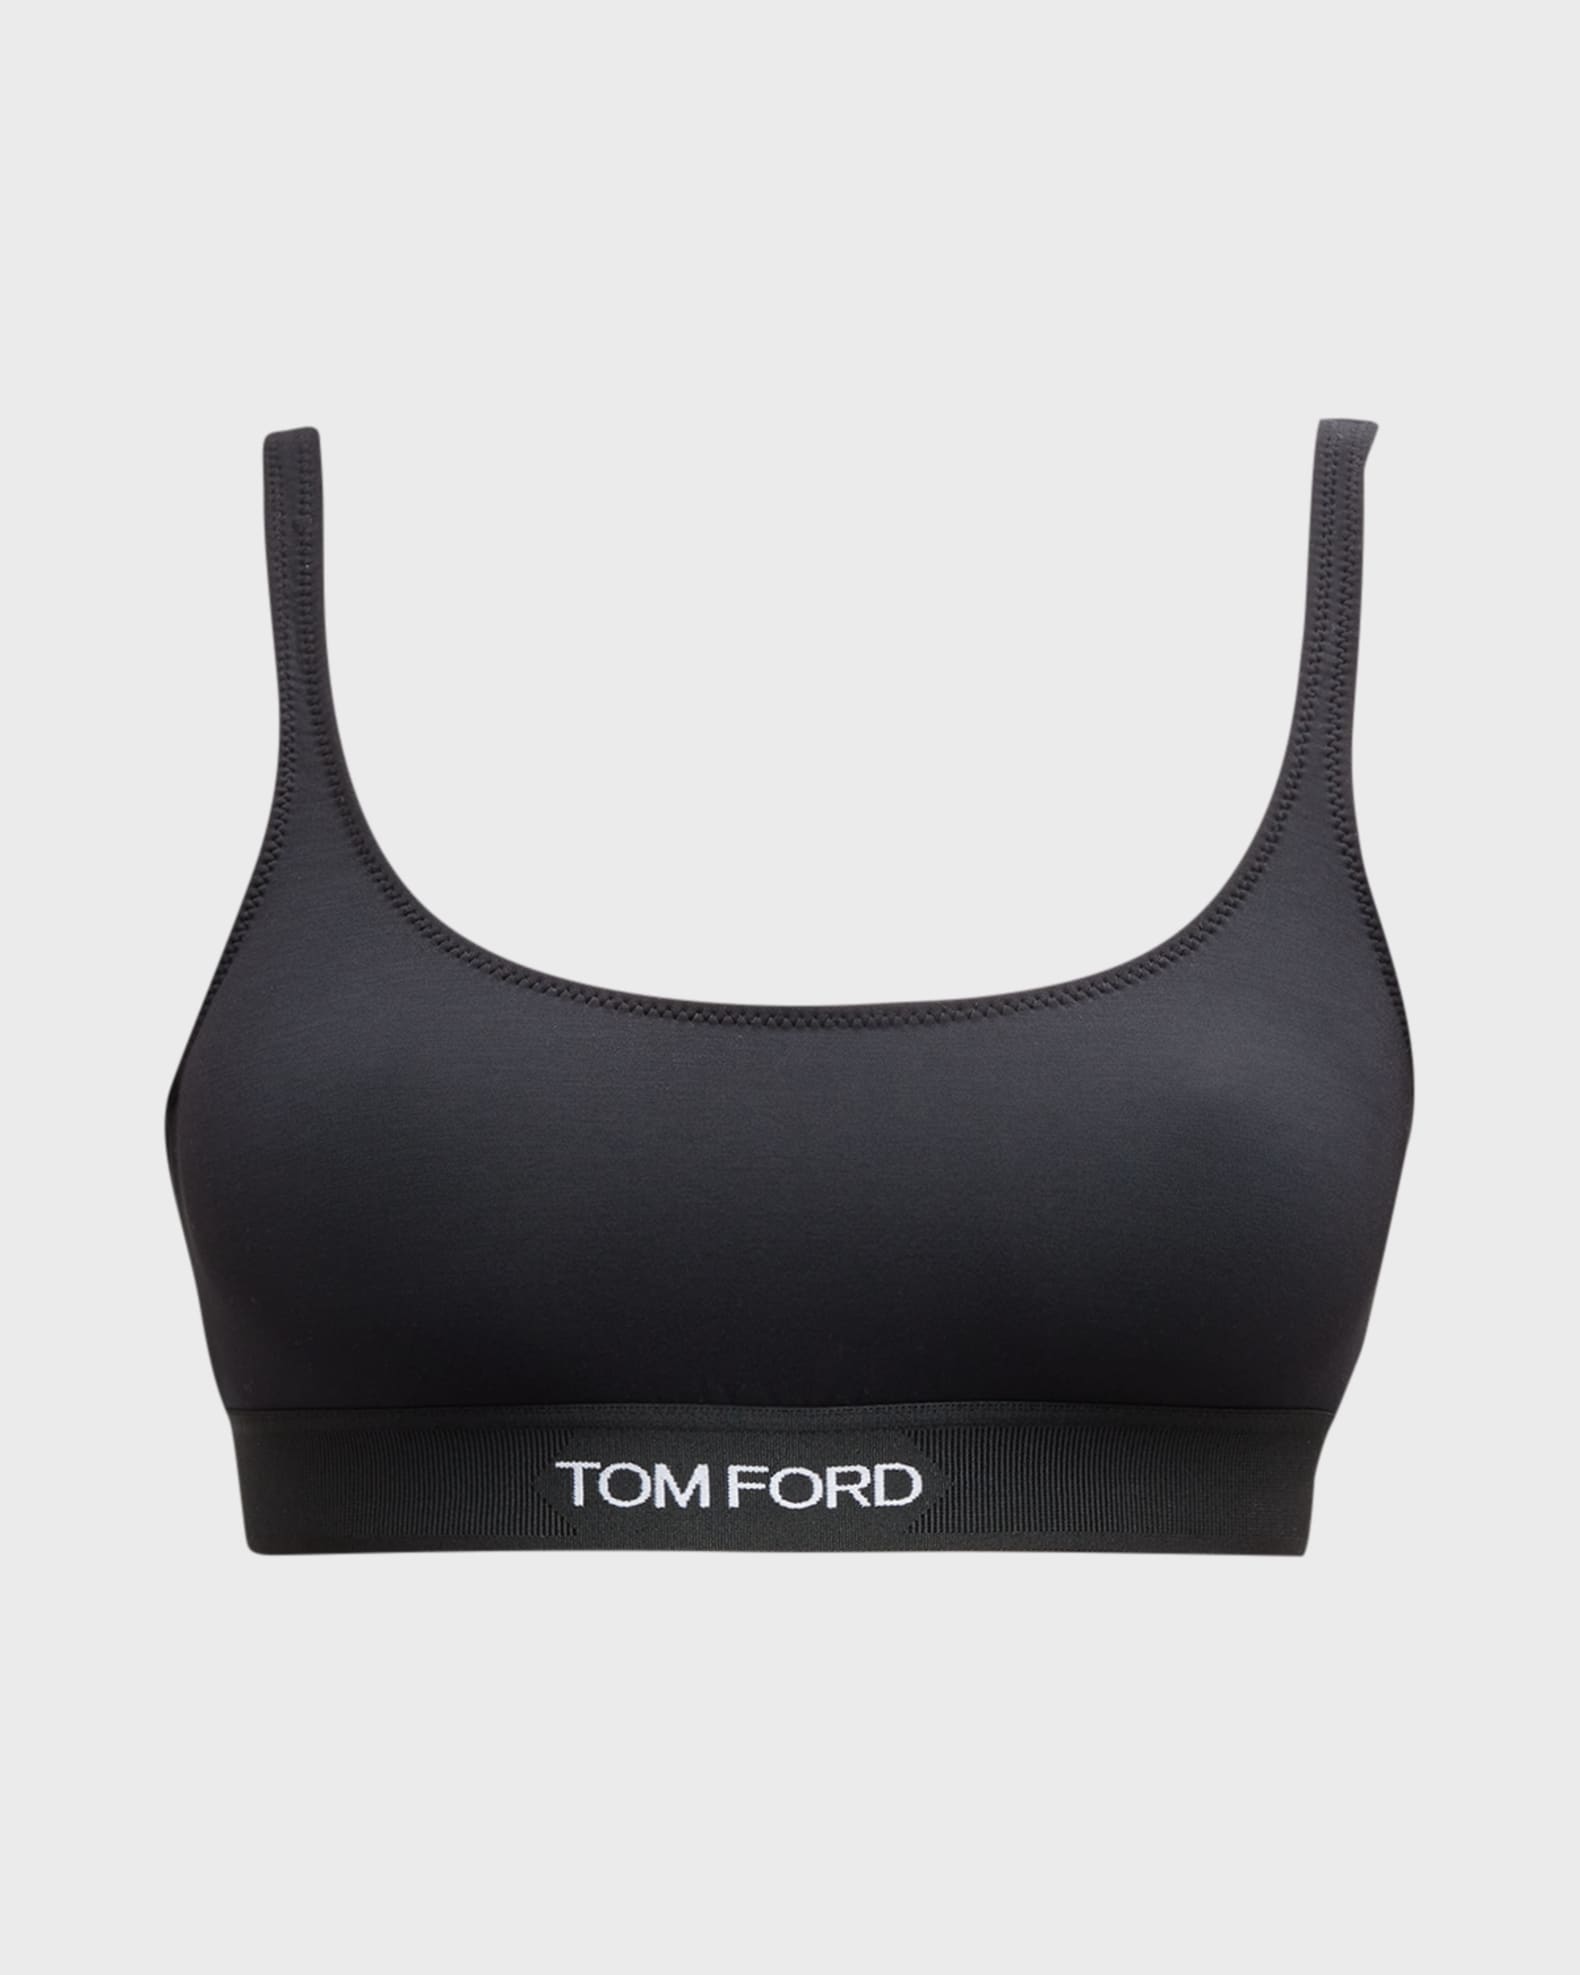 TOM FORD Logo Band Jersey Bralette | Neiman Marcus